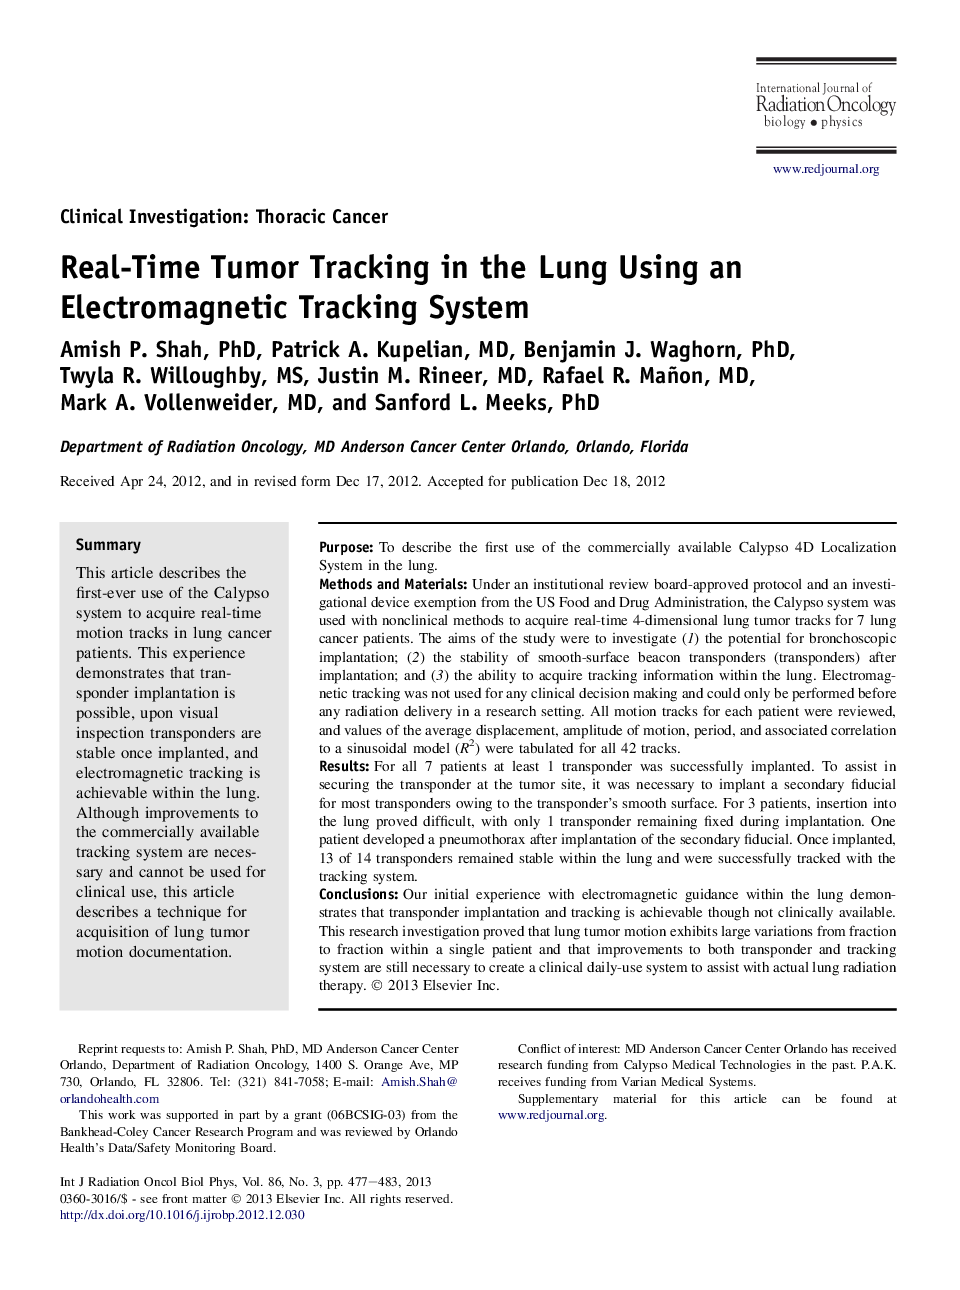 Real-Time Tumor Tracking in the Lung Using an Electromagnetic Tracking System